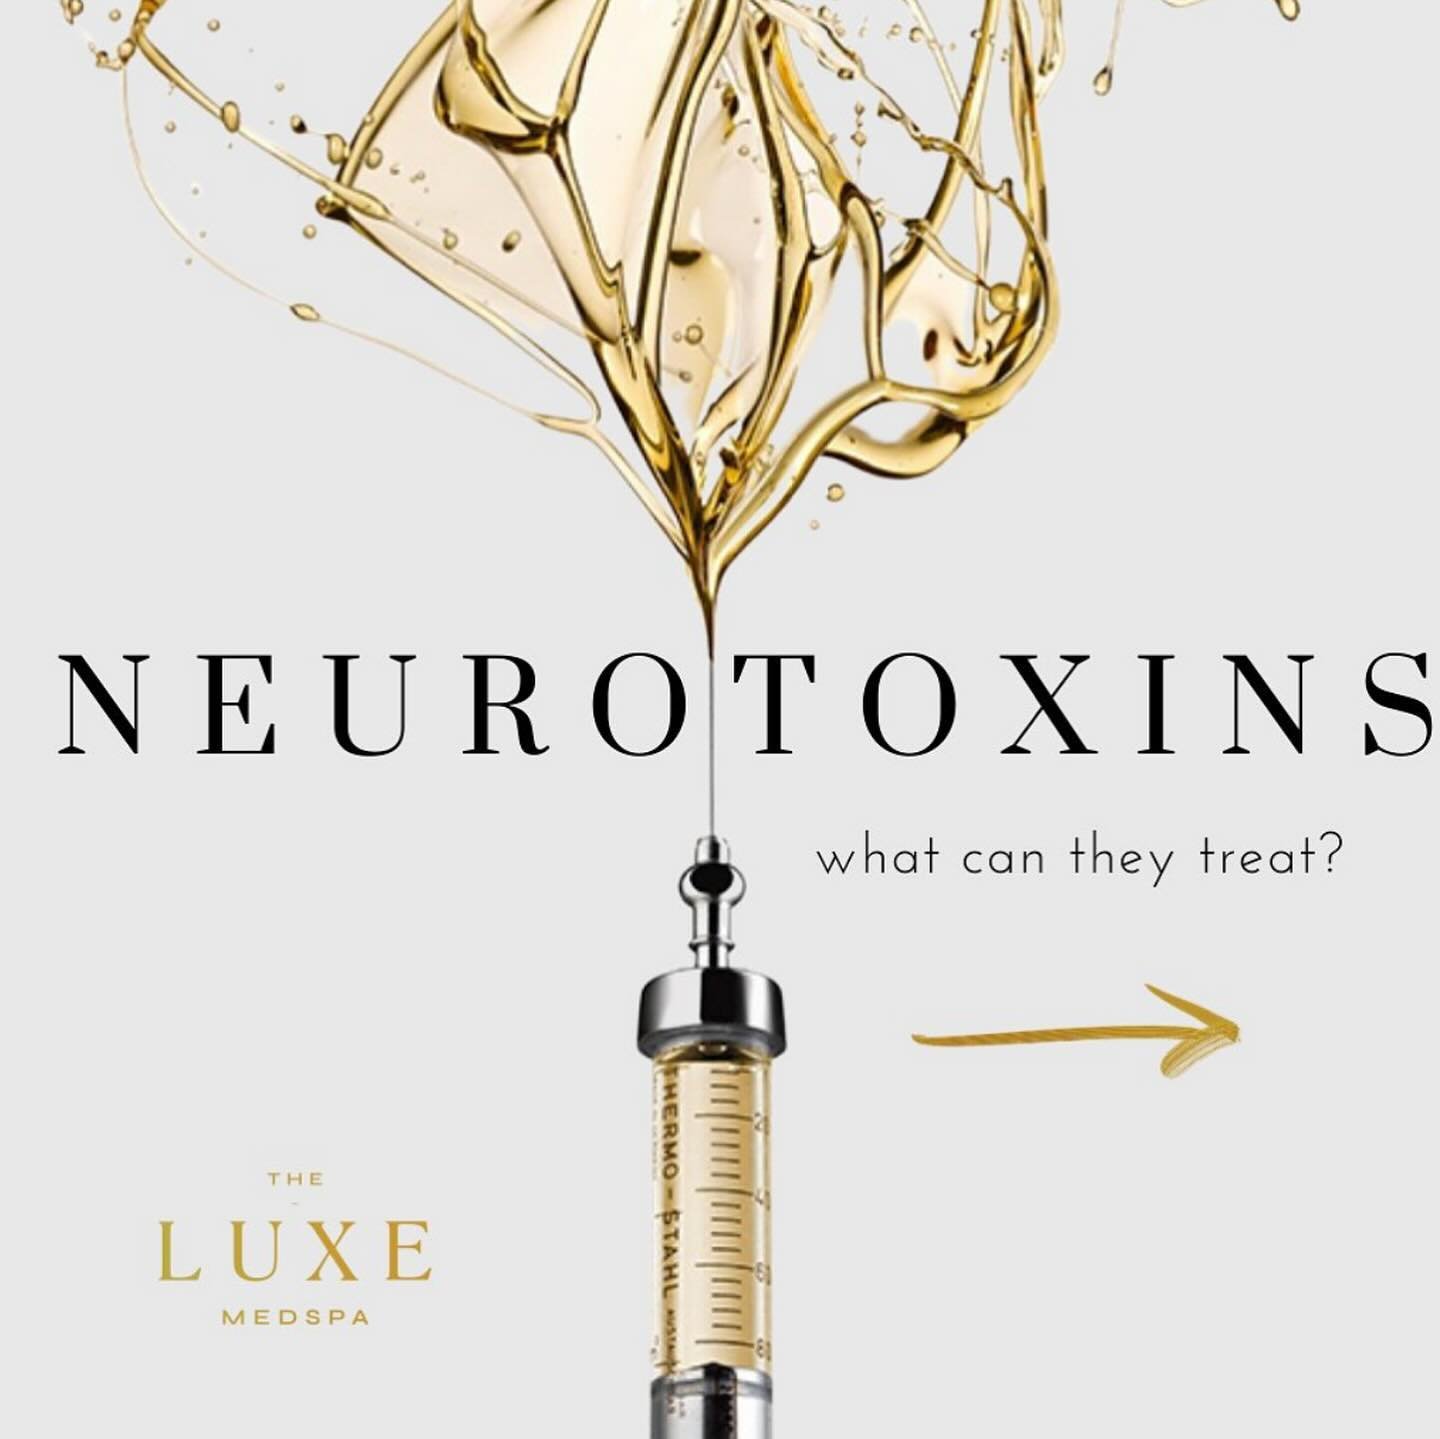 What can NEUROTOXINS treat?⁣
⁣
Neurotoxins are very versatile when it comes to aesthetic treatments. Botox, Jeuveau, Dysport, and Xeomin are the neurotoxin treatments we offer at The Luxe Medspa. A 15-minute office visit can address the following iss